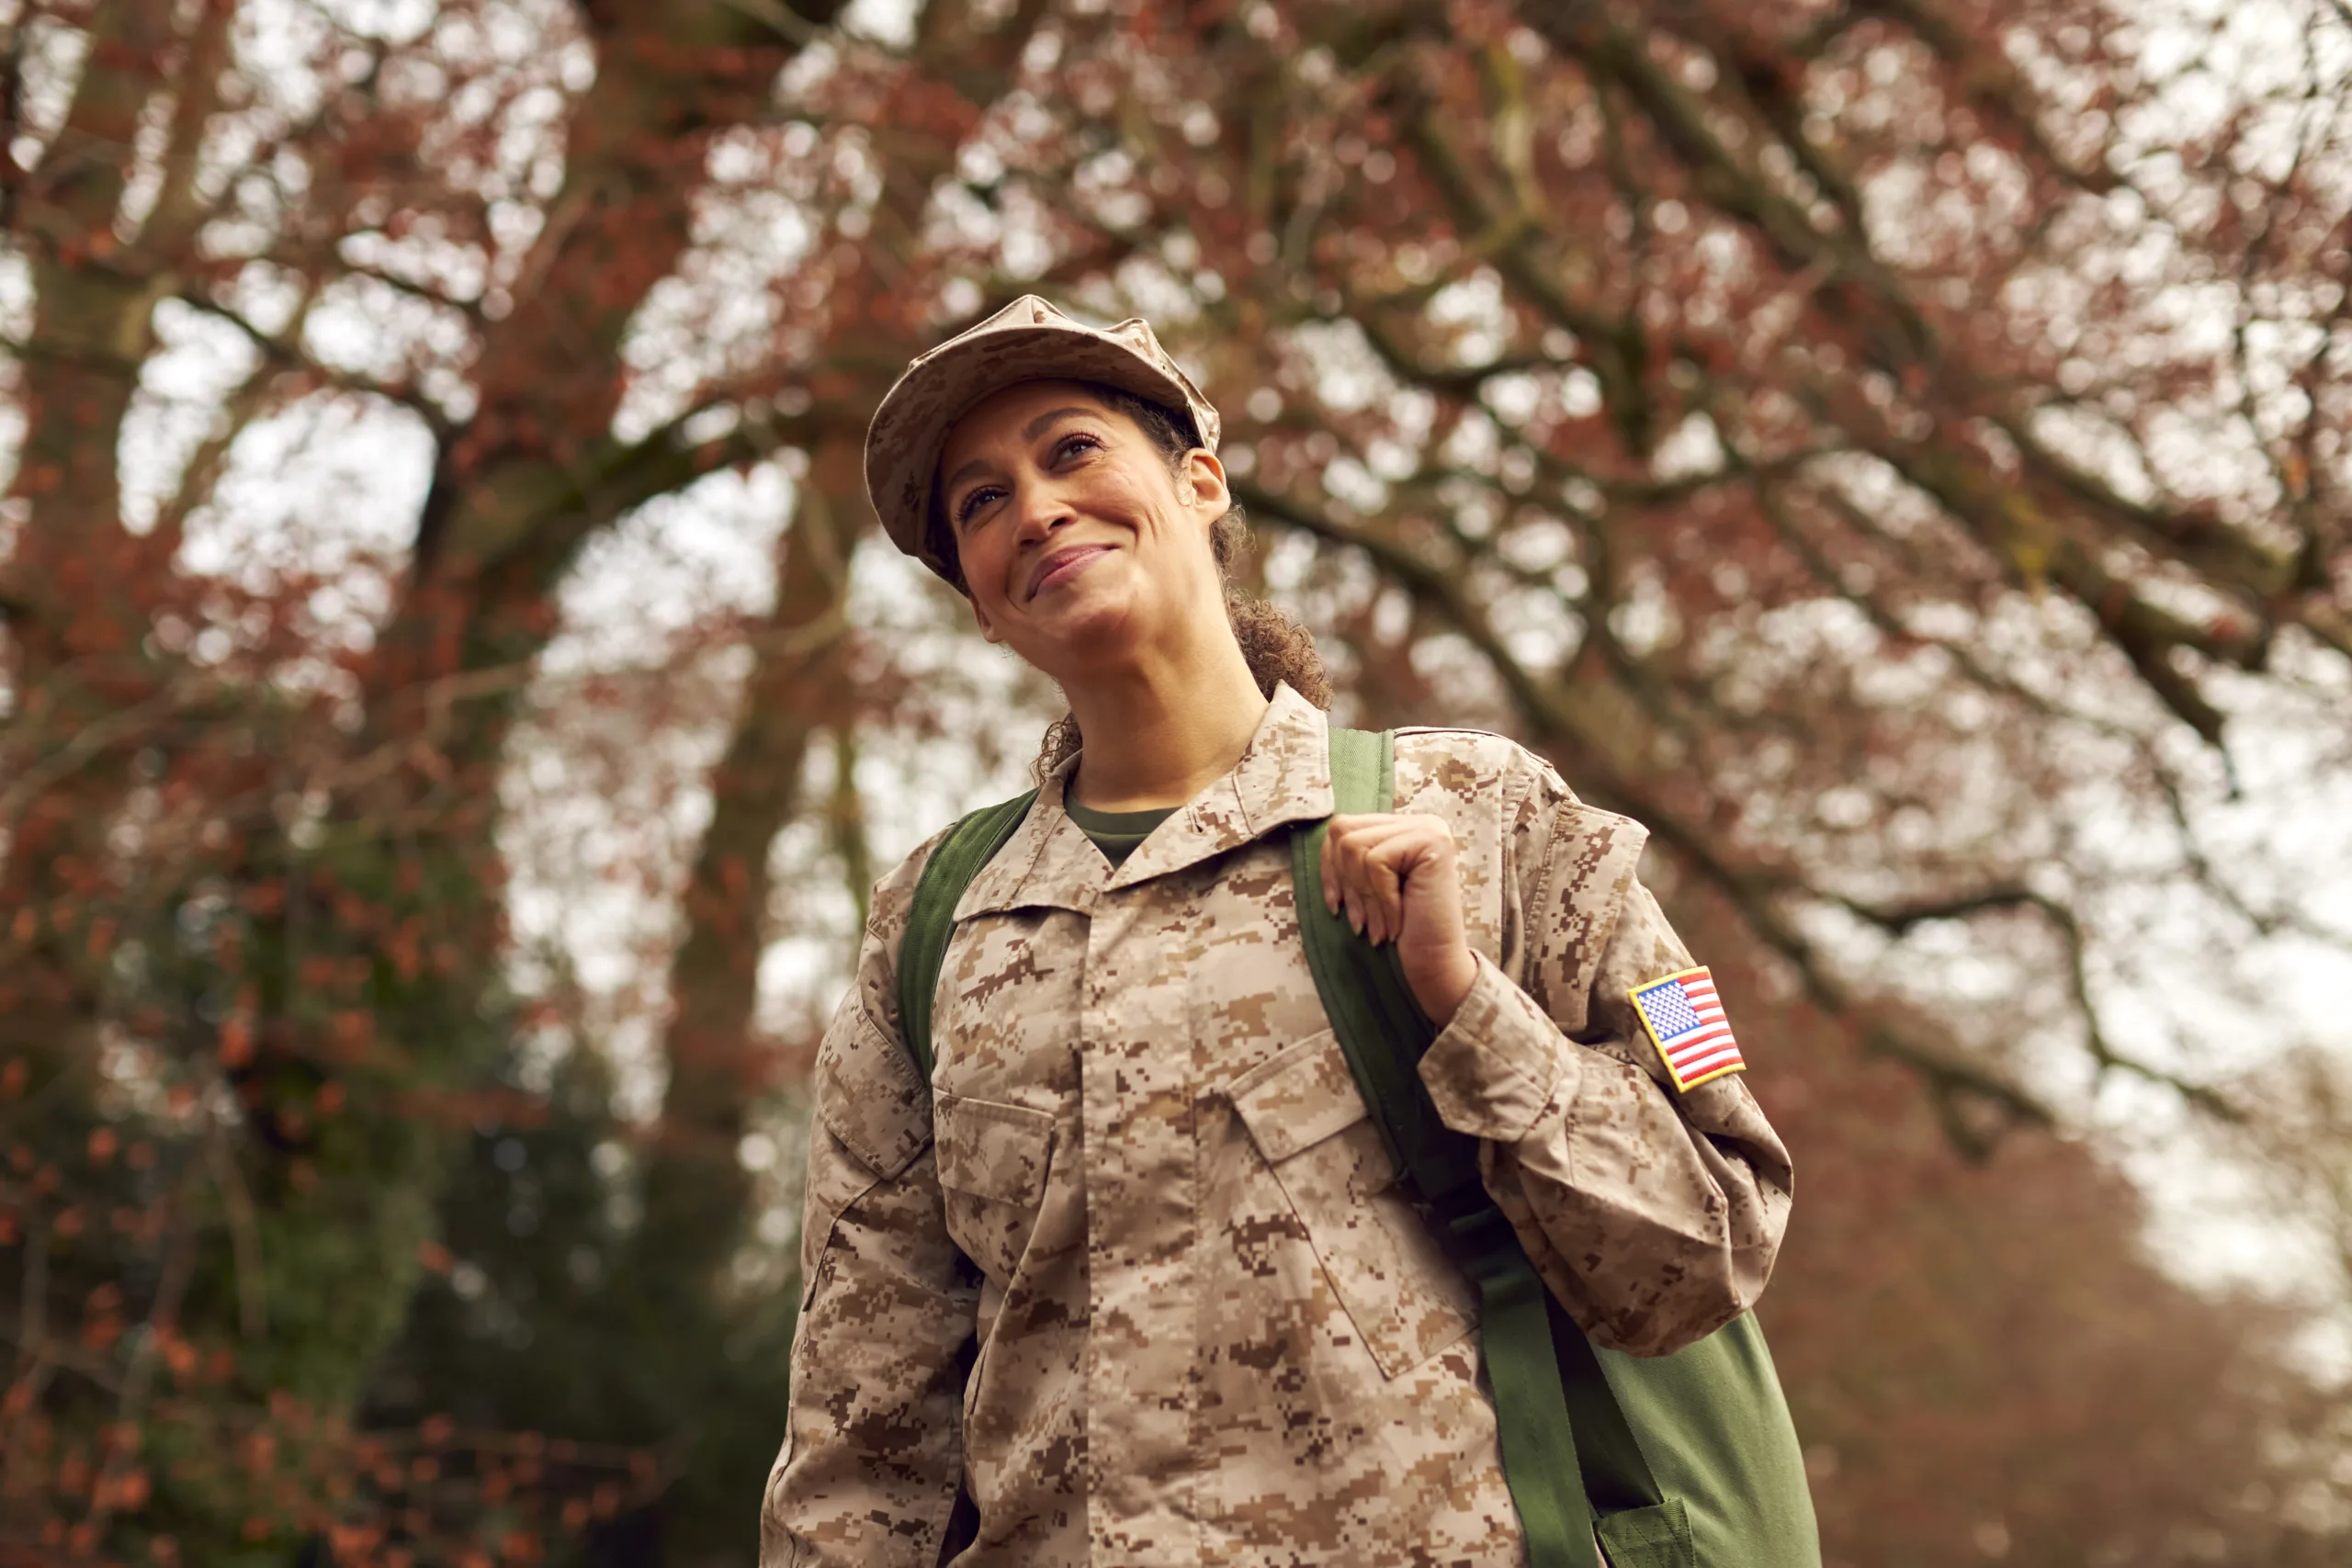 American Female Soldier In Uniform Carrying Kitbag Returning Home On Leave